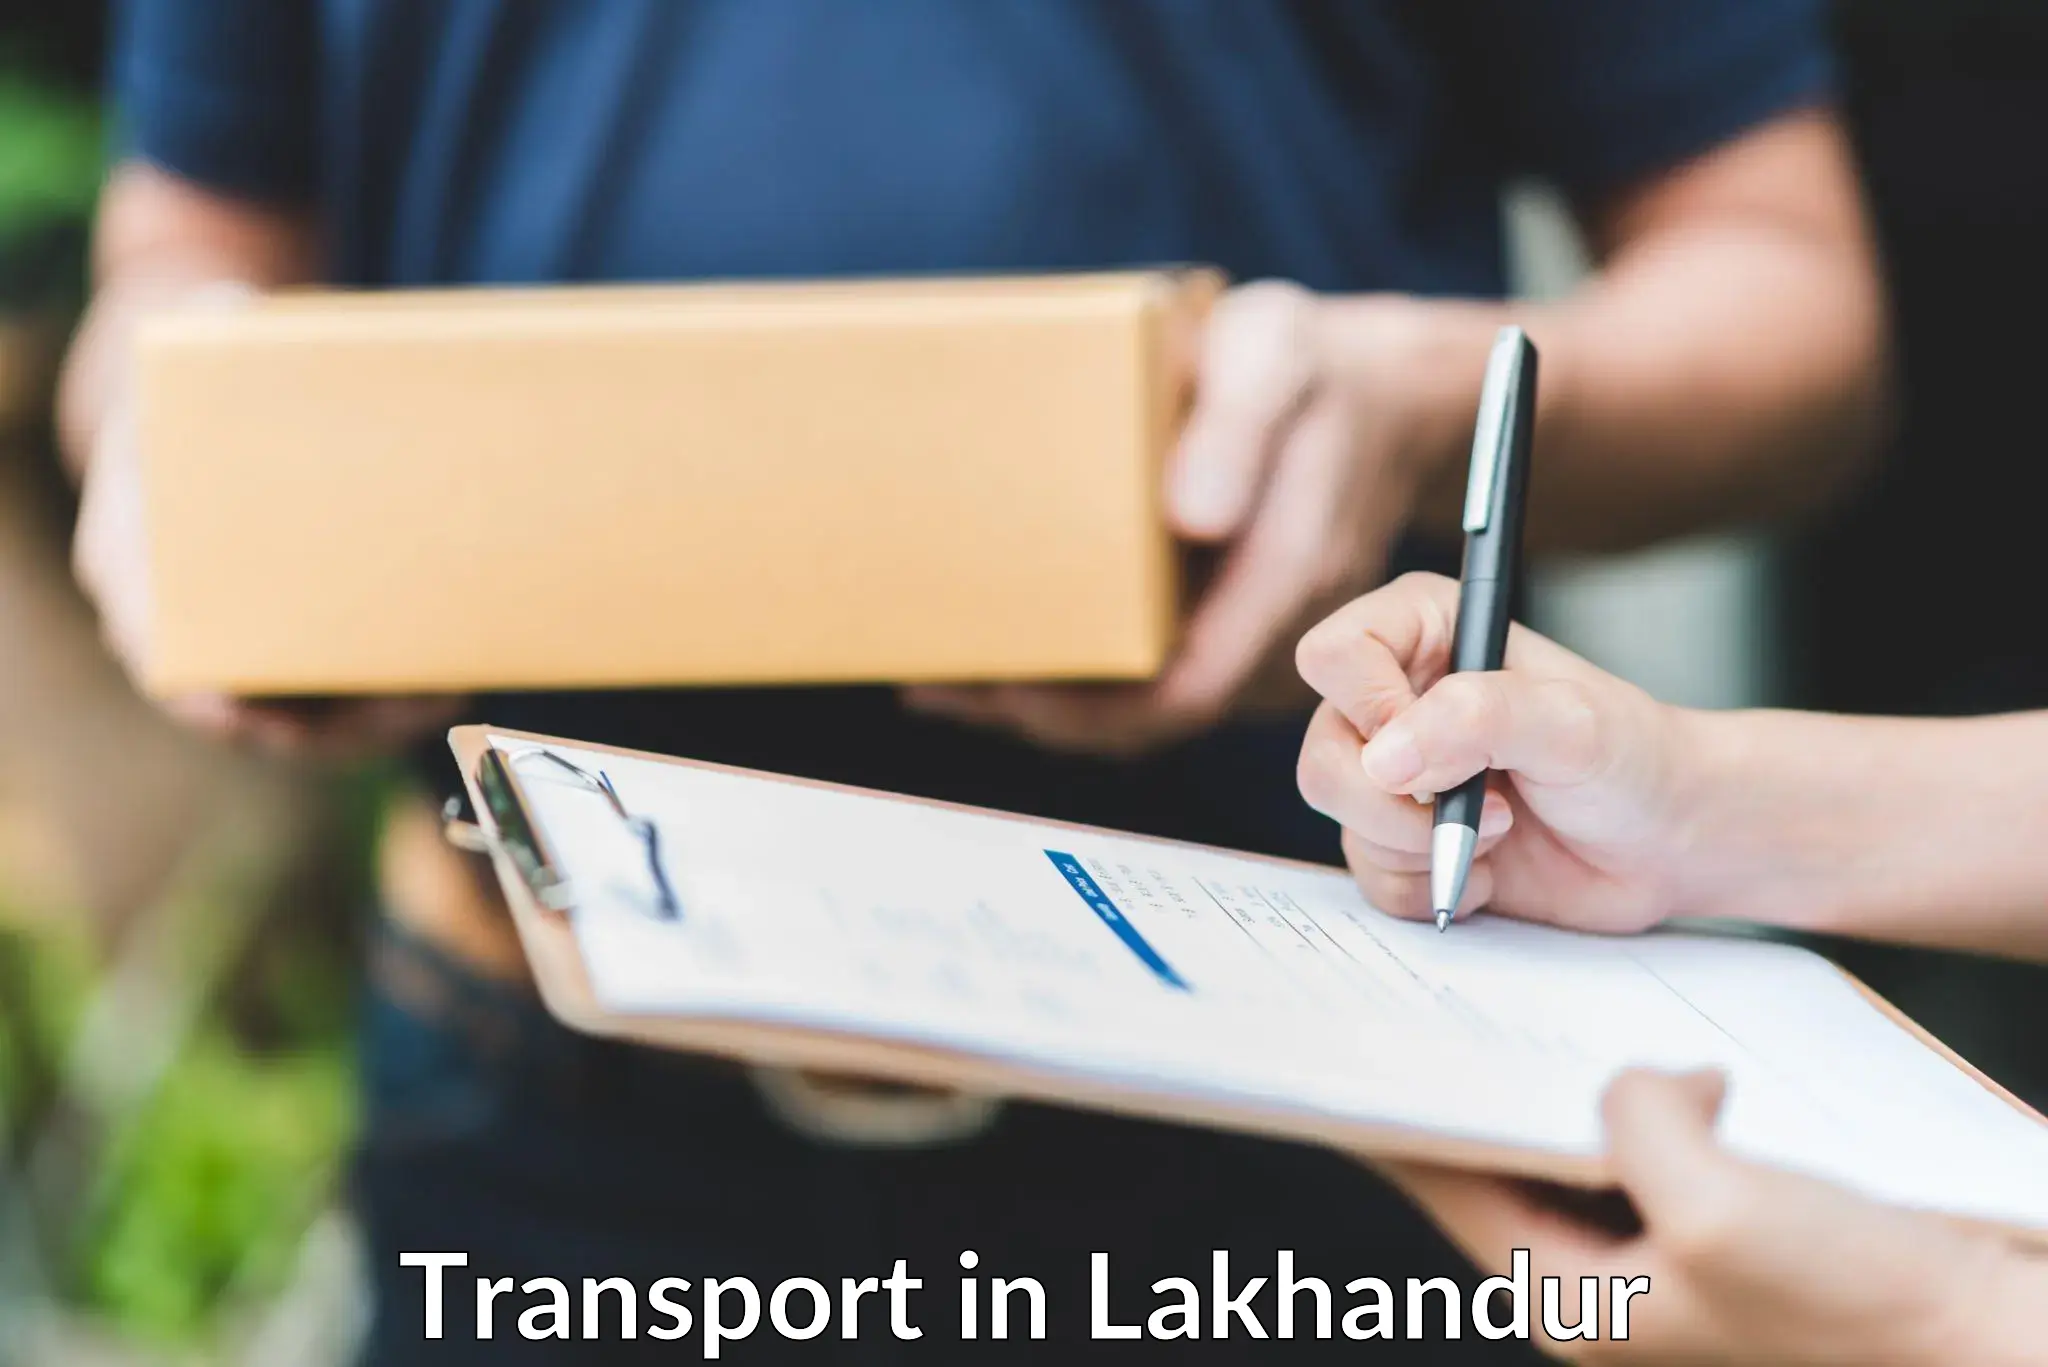 Nationwide transport services in Lakhandur